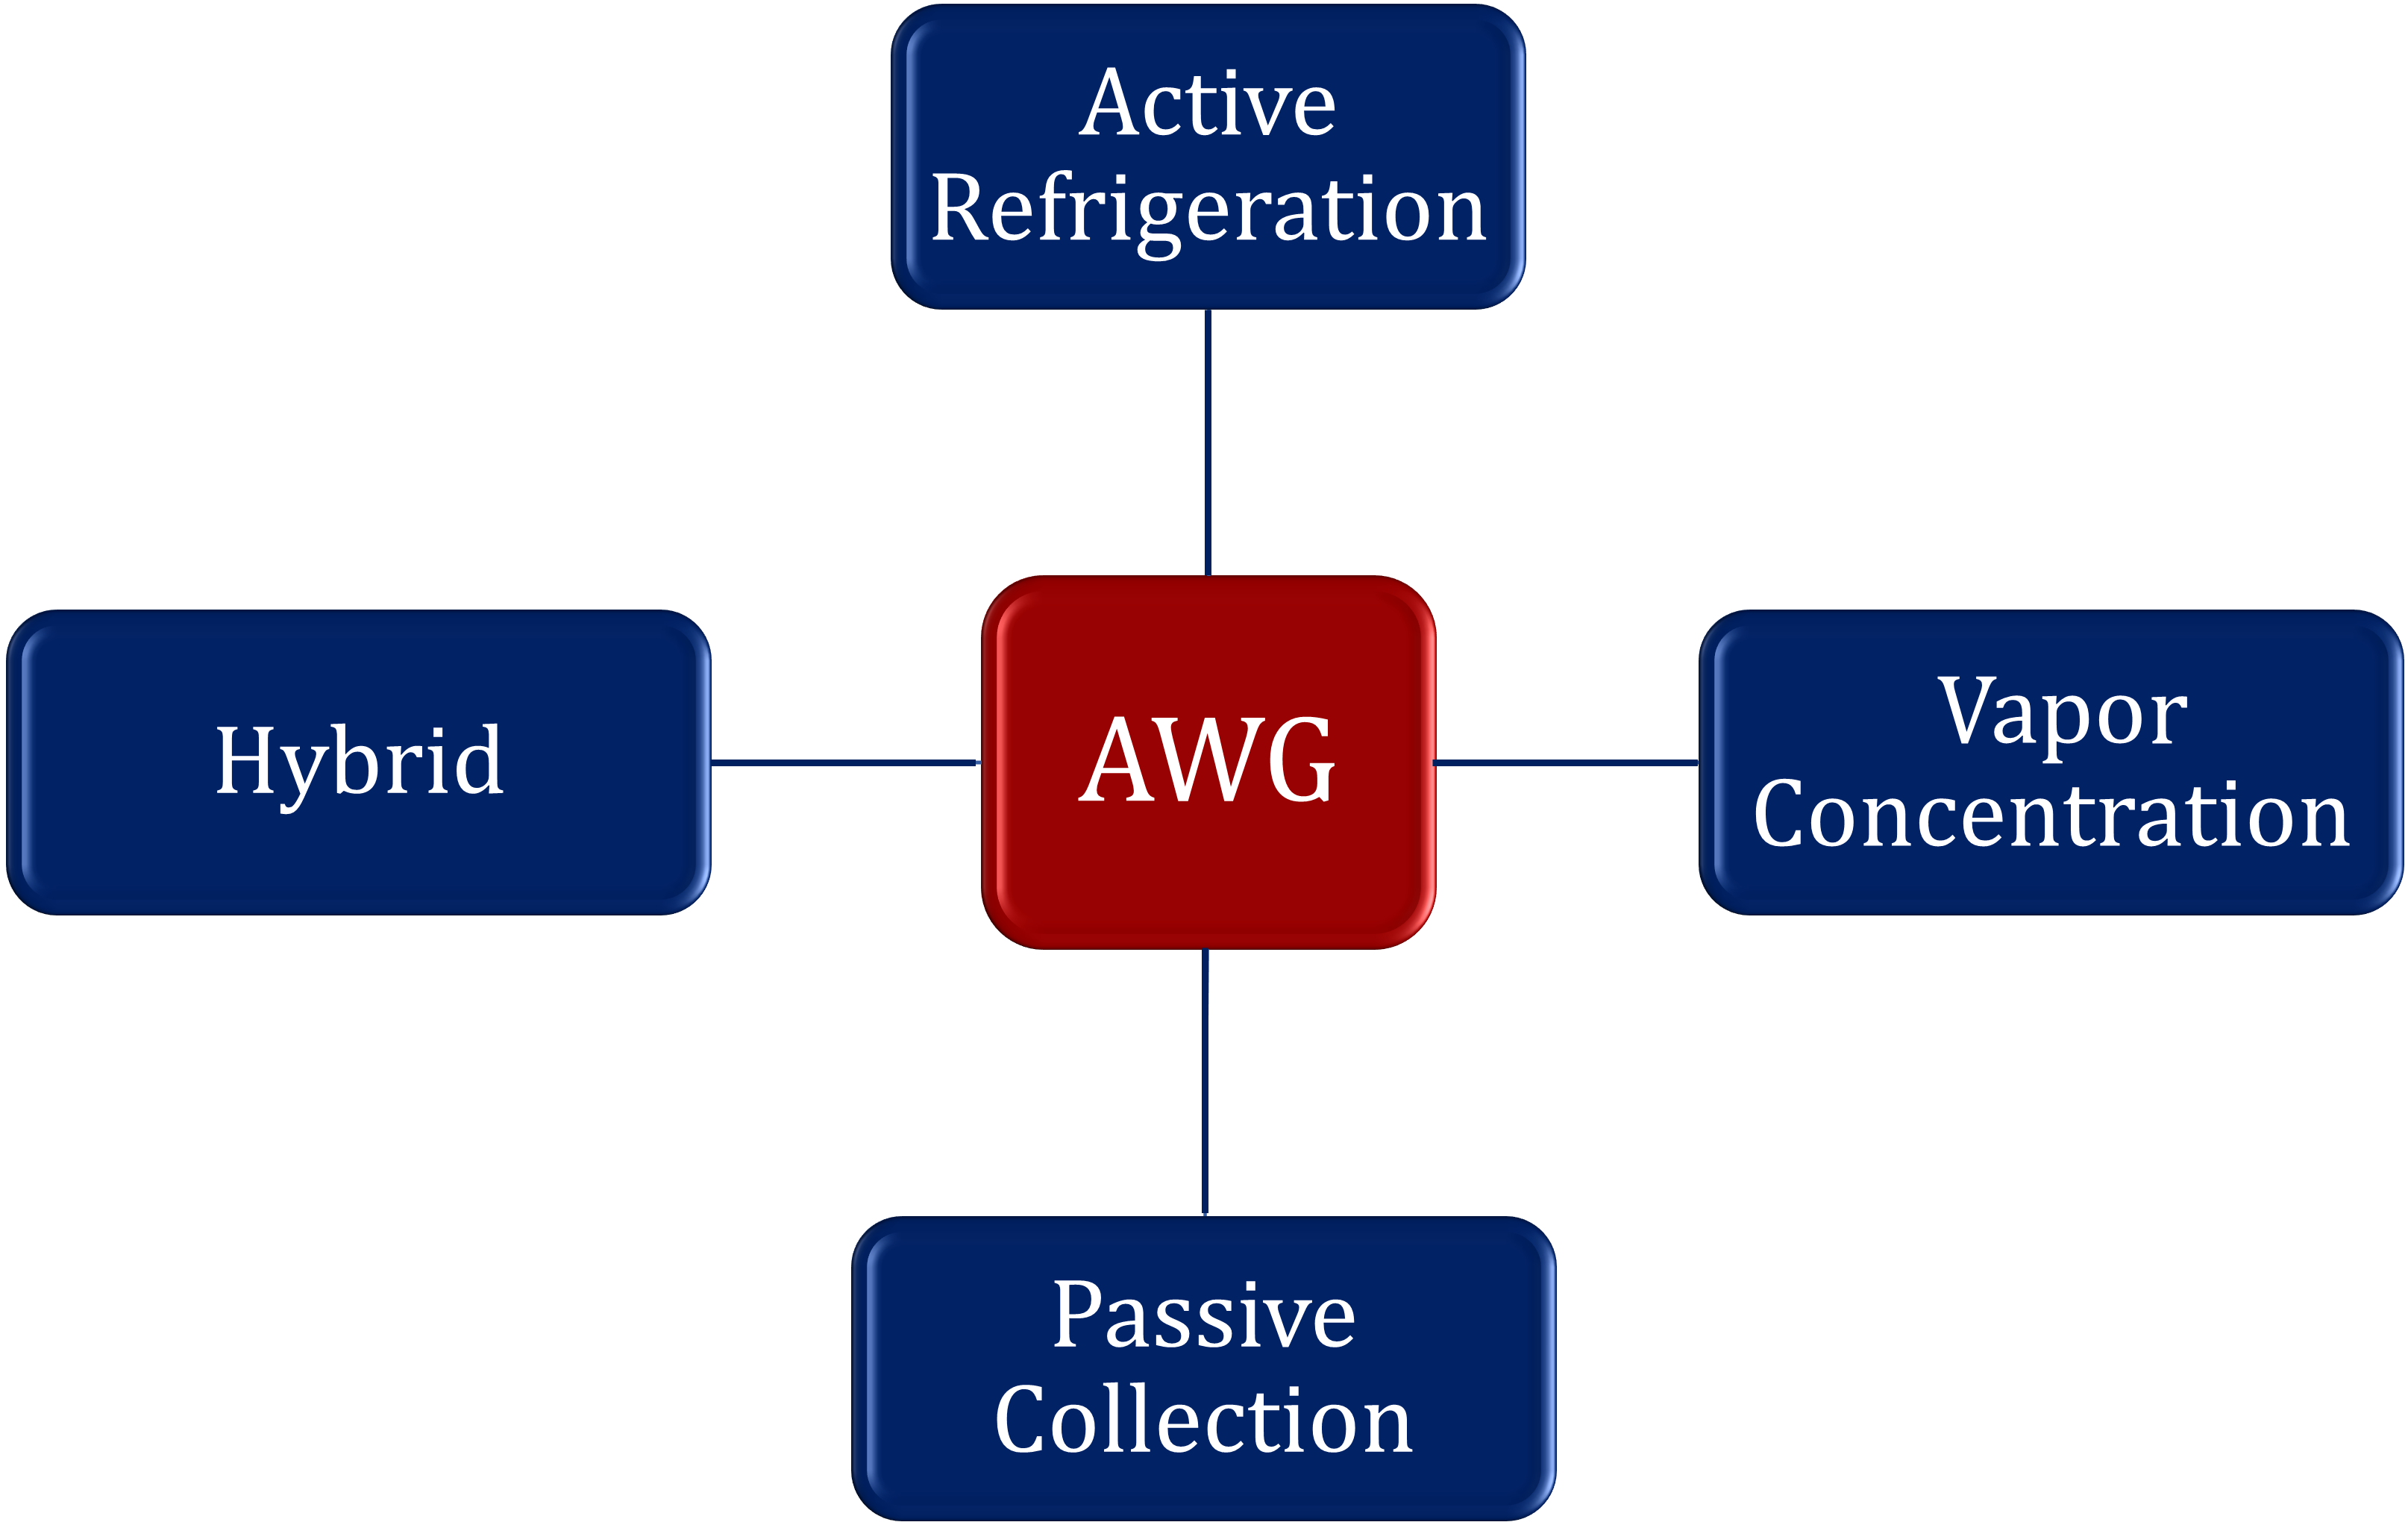 Classification of AWG approaches